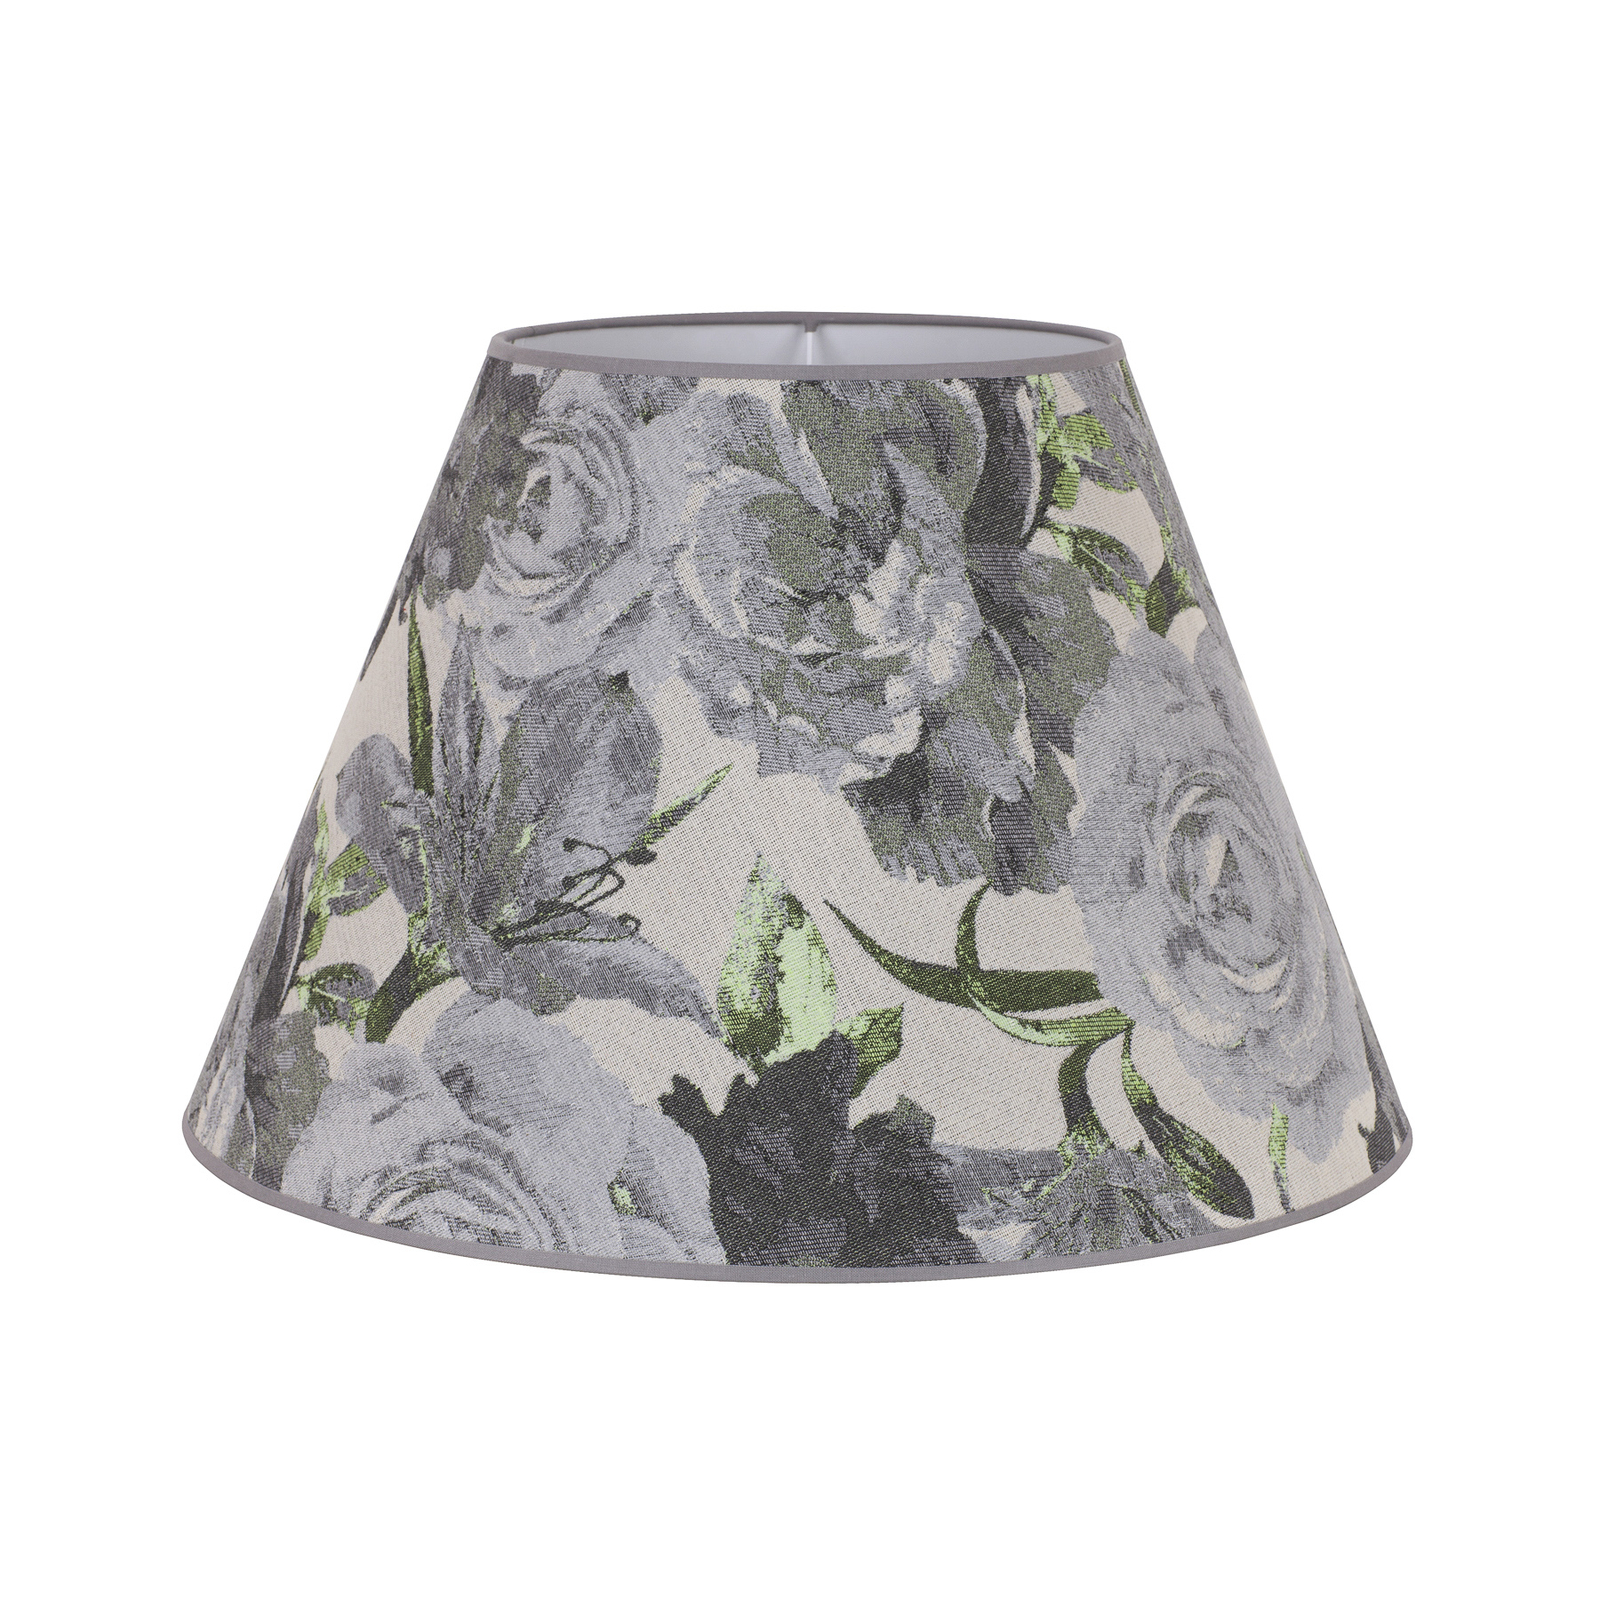 Sofia lampshade height 31 cm, floral pattern grey